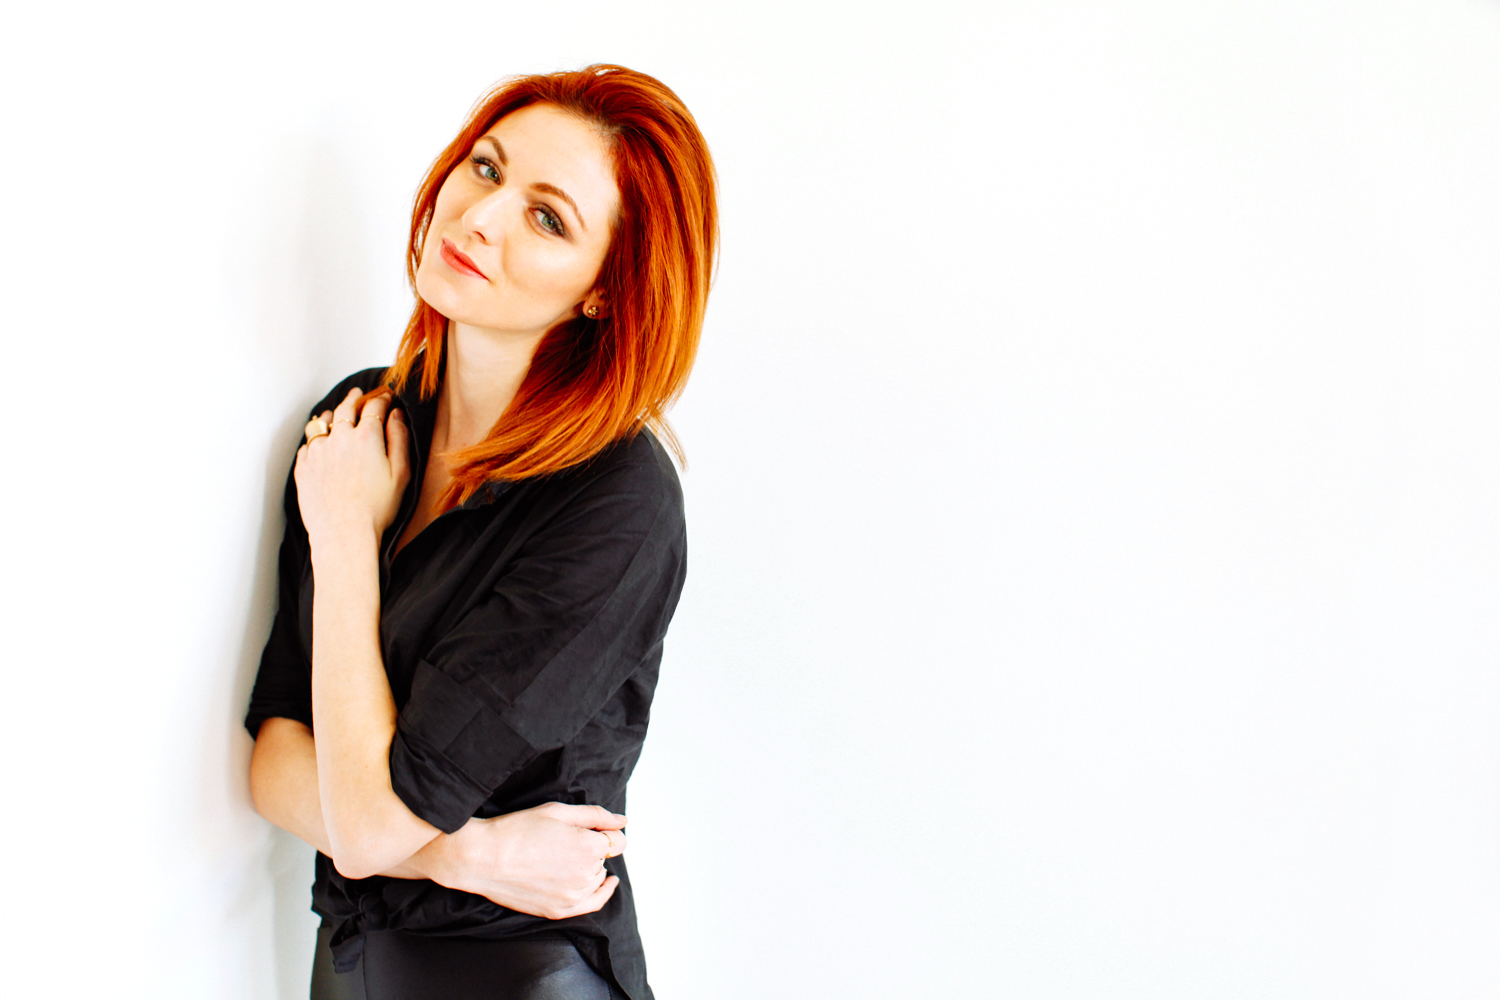 Black shirt and red hair